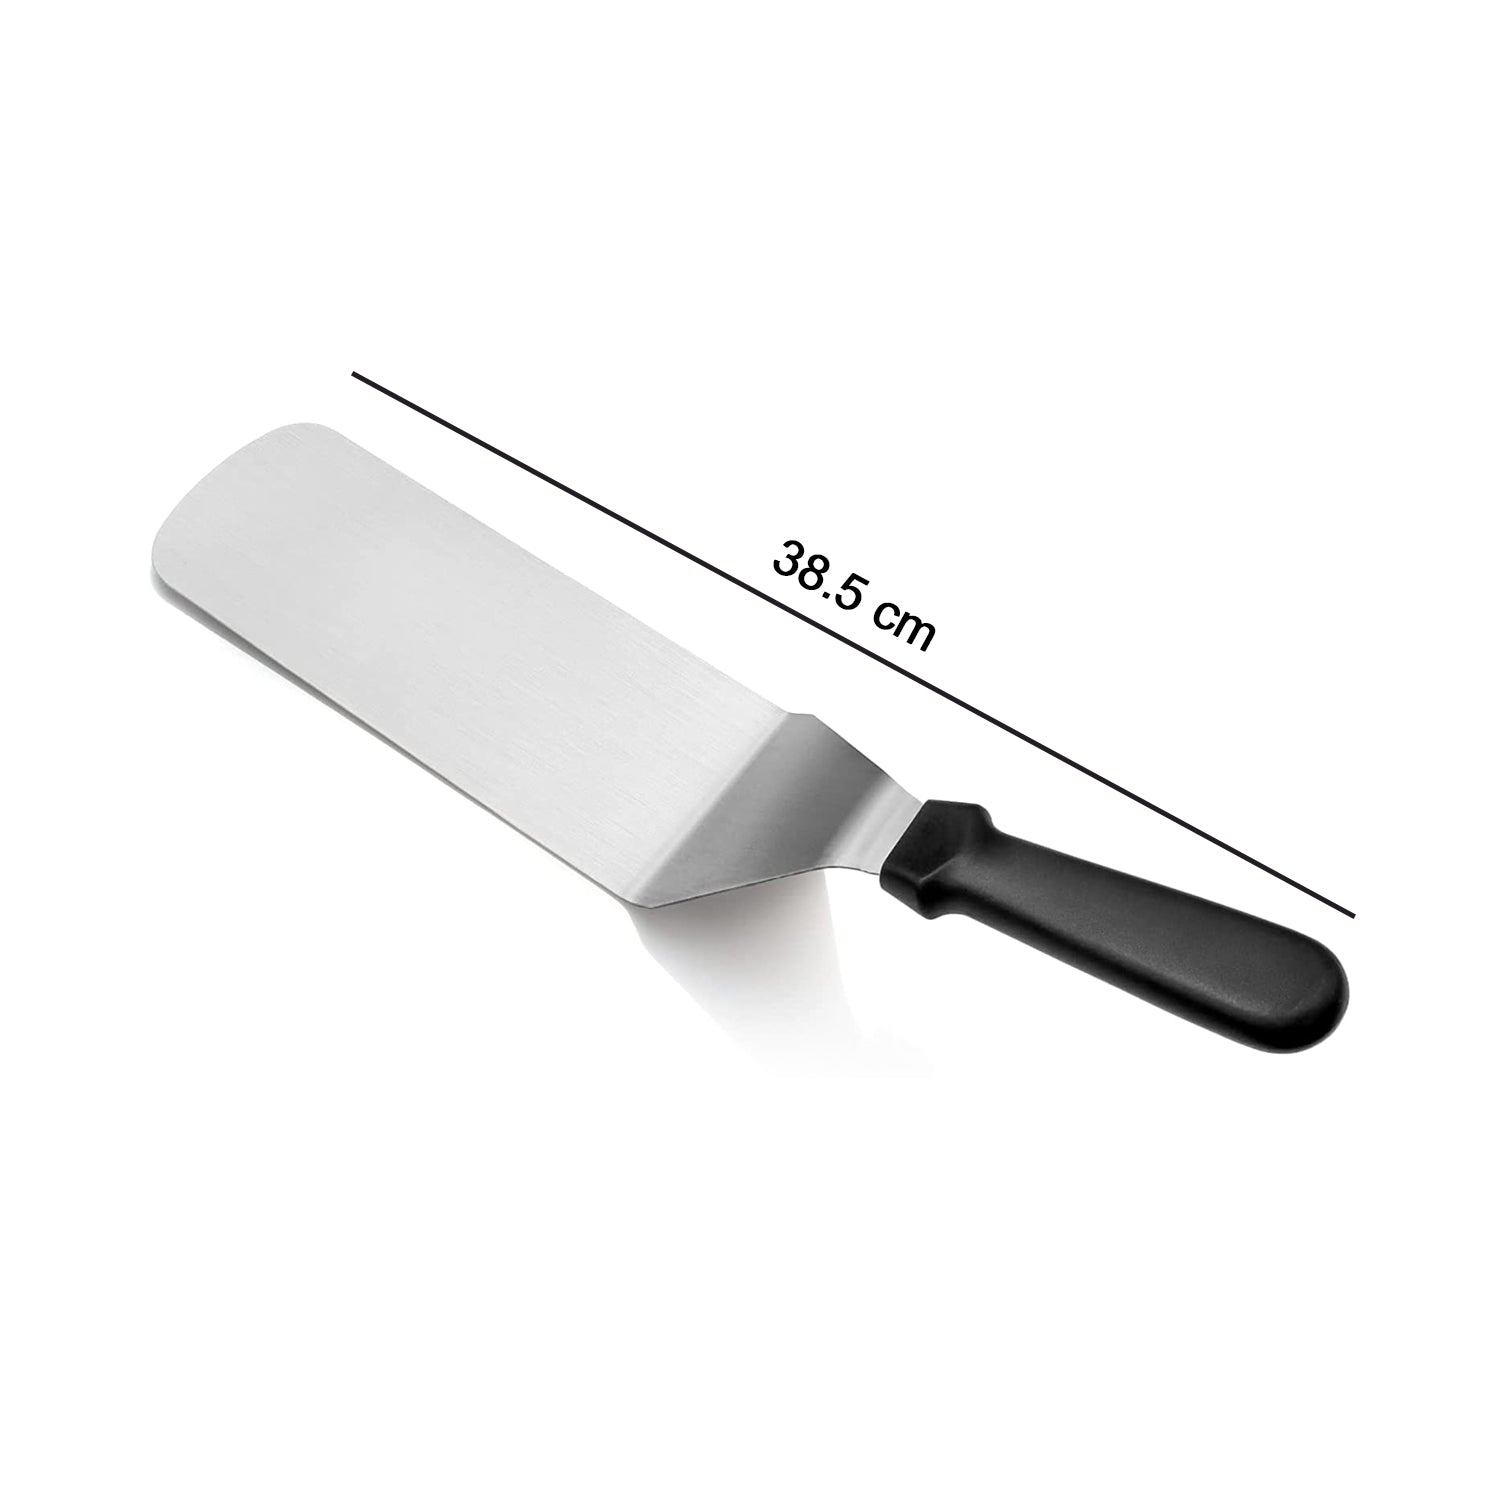 2441 Stainless steel Spatula with Black Handle. DeoDap